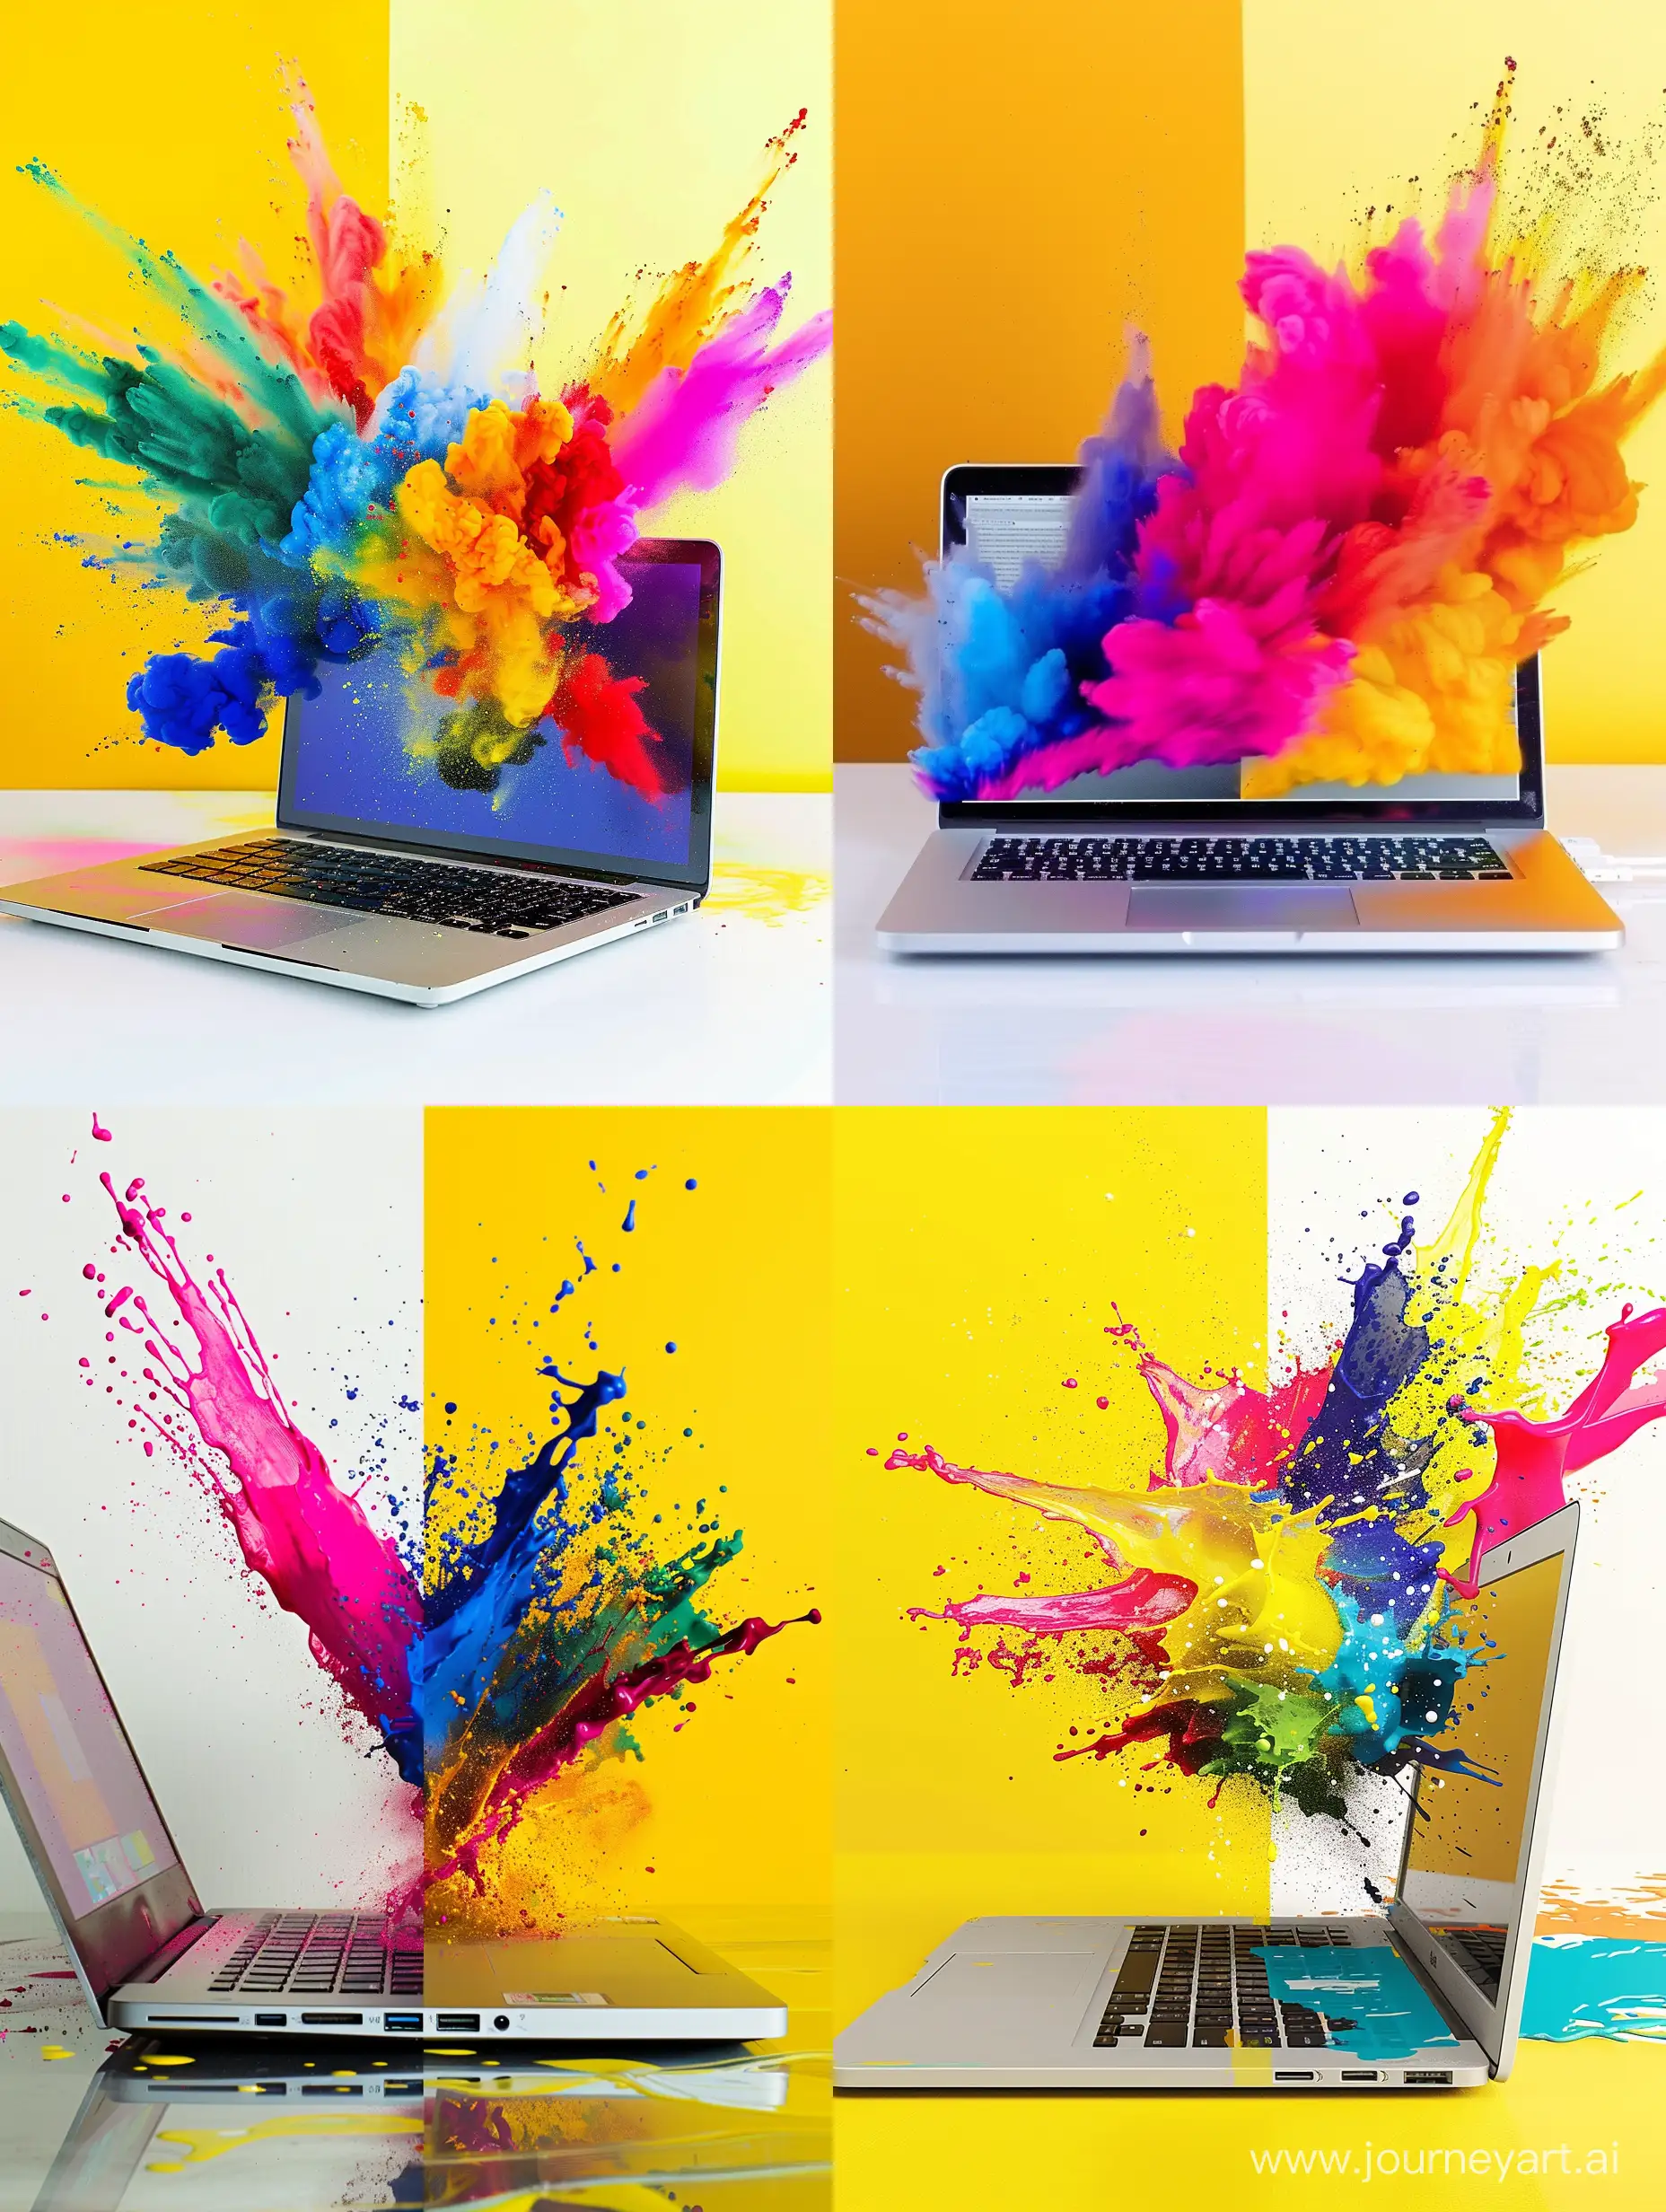 I need a picture that shows a laptop with a booming of colours getting of  from in side the laptop with , and we see the laptop from 45 degree with a white and yellow background for the picture to show the importance of graphic design 